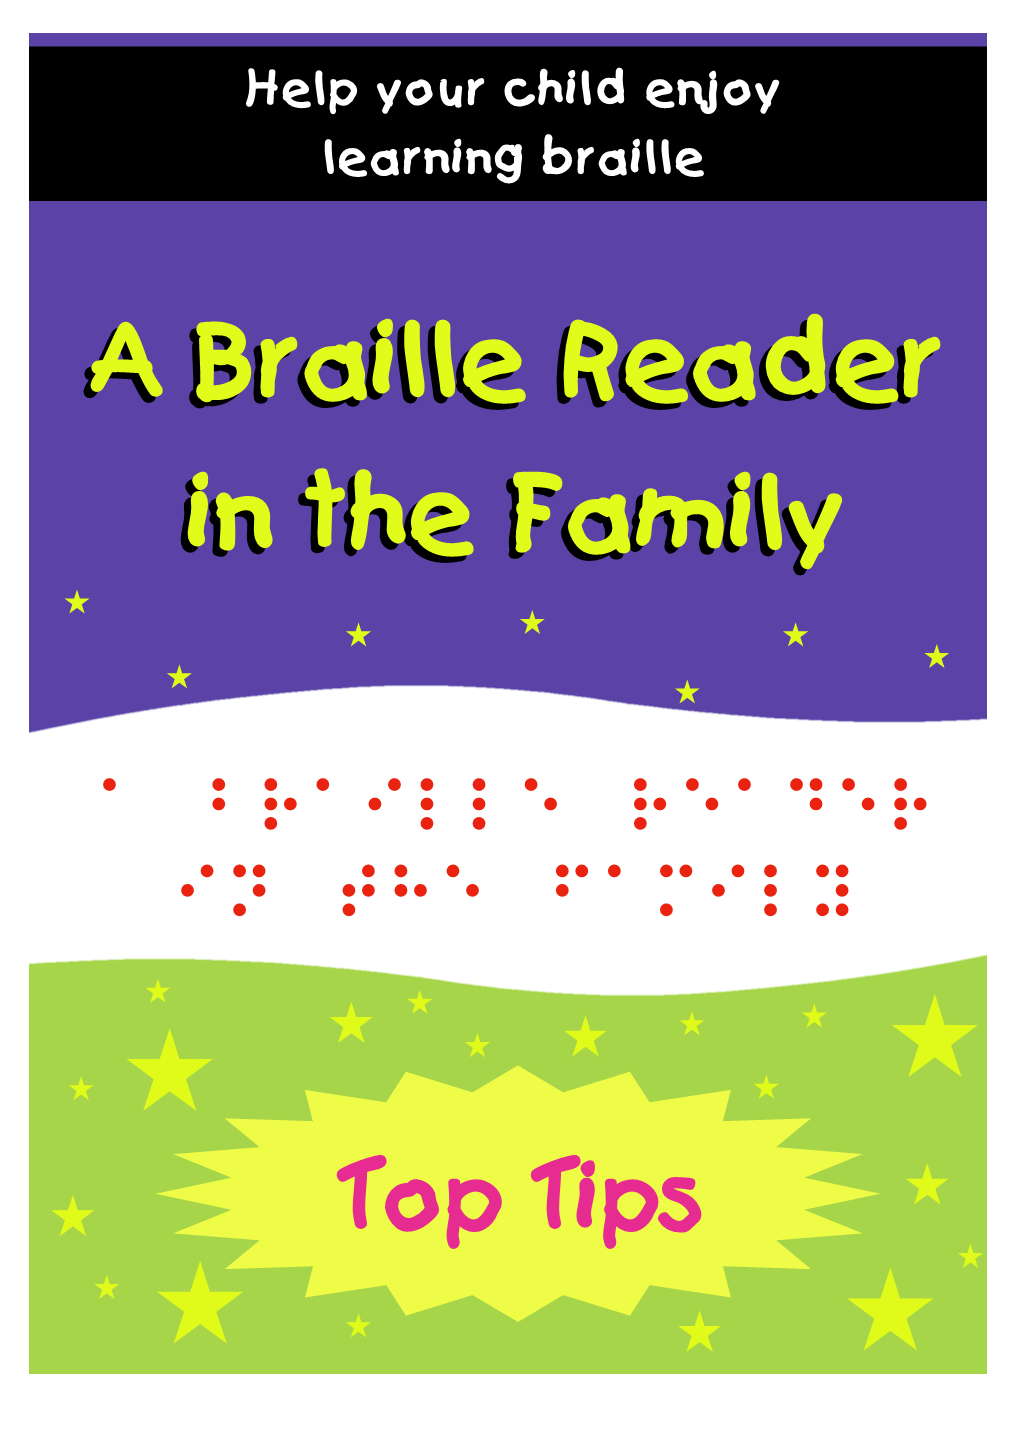 Finding the Braille